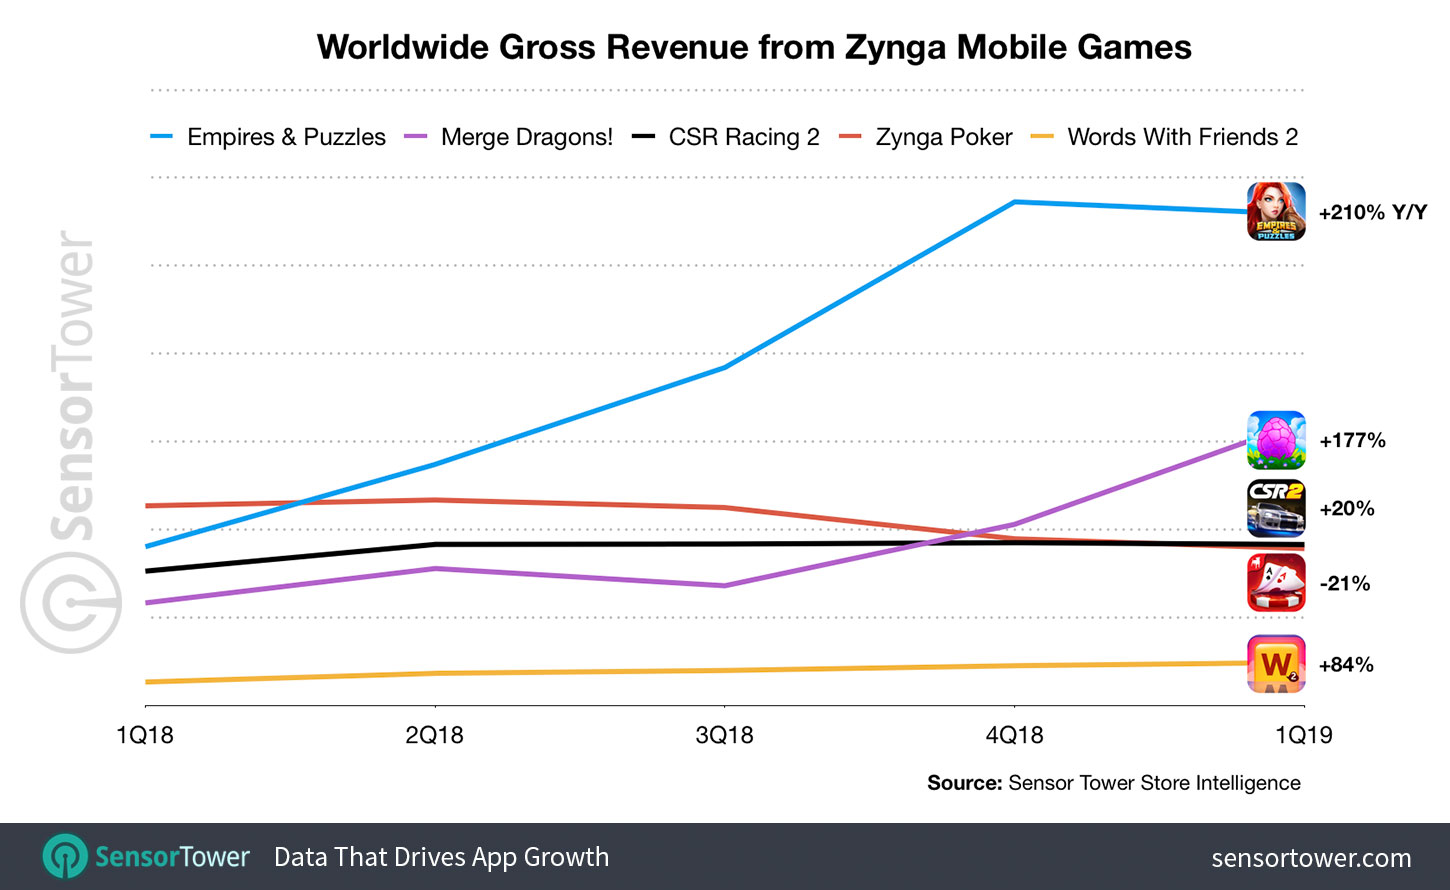 Revenue from Zynga Mobile Games by Quarter